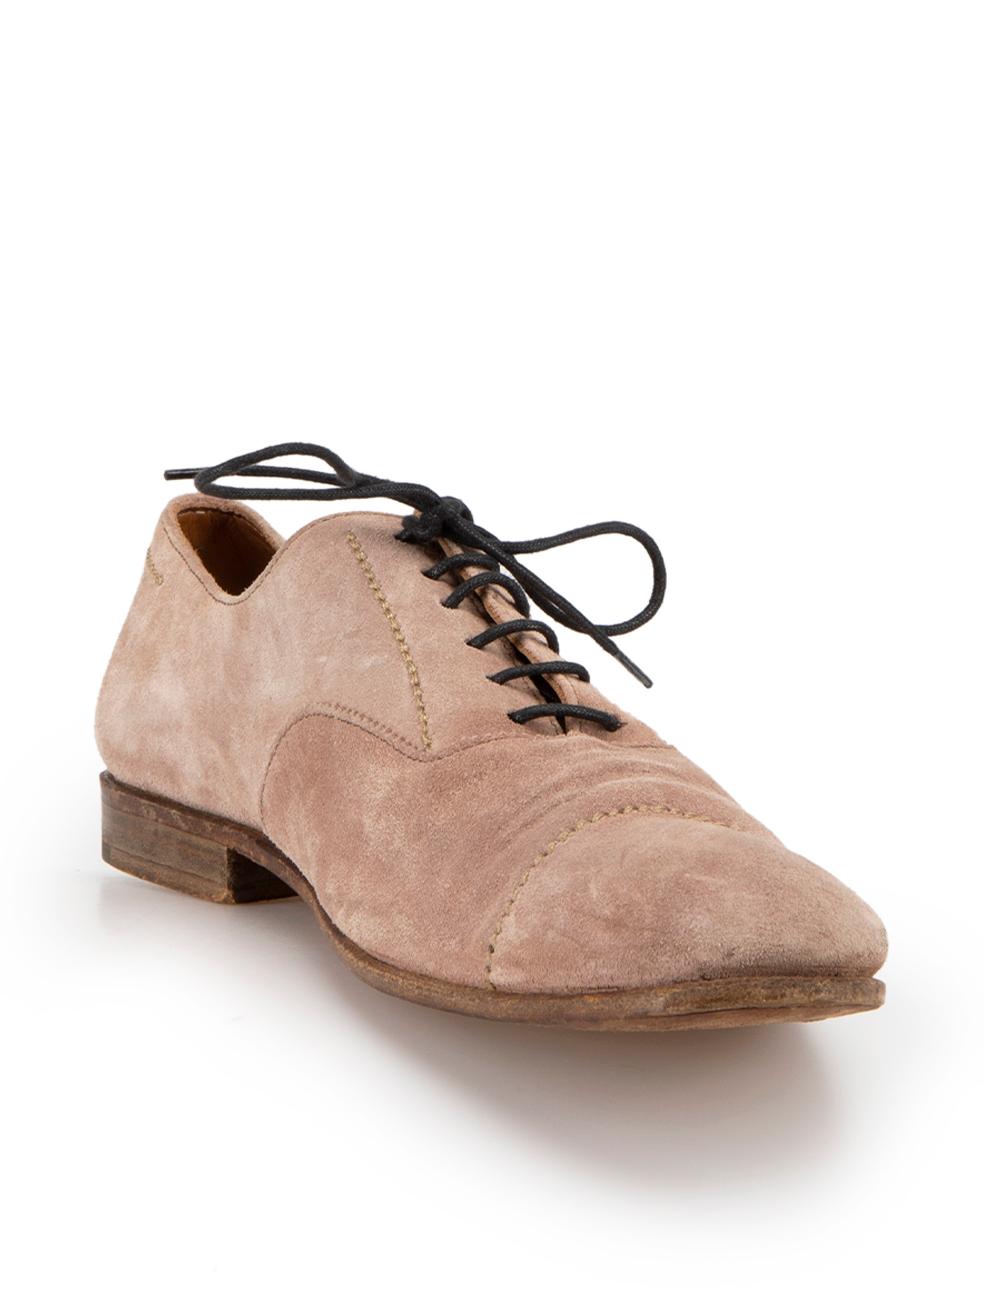 CONDITION is Good. General wear to shoes is evident. Moderate signs of wear and marking on the whole upper and sole of this used Margaret Howell designer resale item.



Details


Dusty pink

Suede

Oxfords

Round-toe

Black lace up